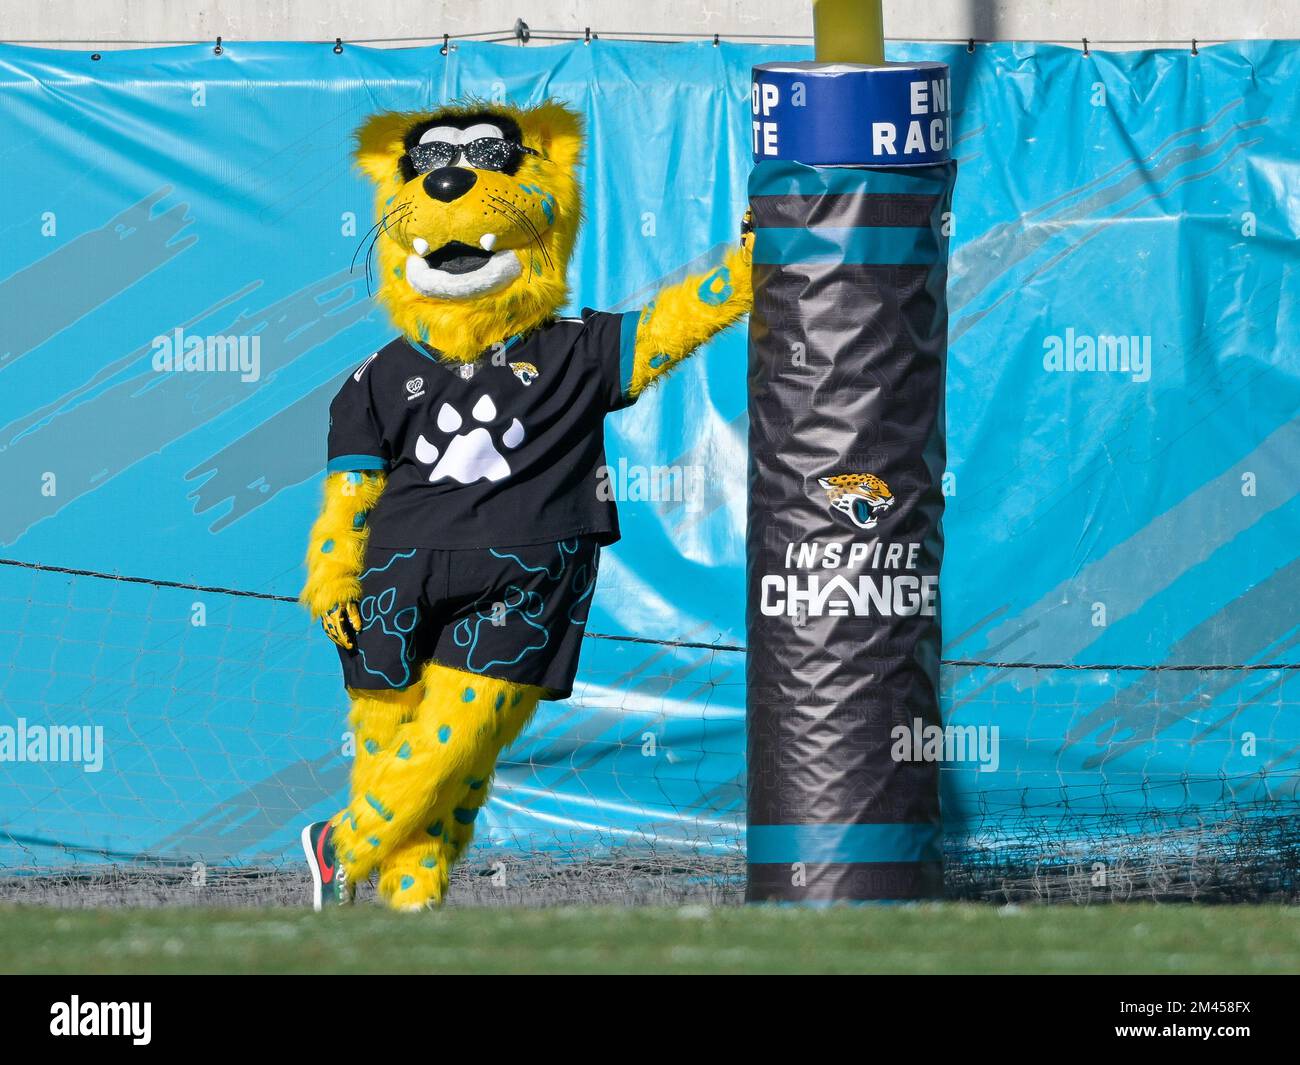 Jacksonville, FL, USA. 18th Dec, 2022. Jaxson de Ville stands by the goal post in the North Endzone during the game between the Jacksonville Jaguars and the Dallas Cowboys in Jacksonville, FL. Romeo T Guzman/CSM/Alamy Live News Stock Photo